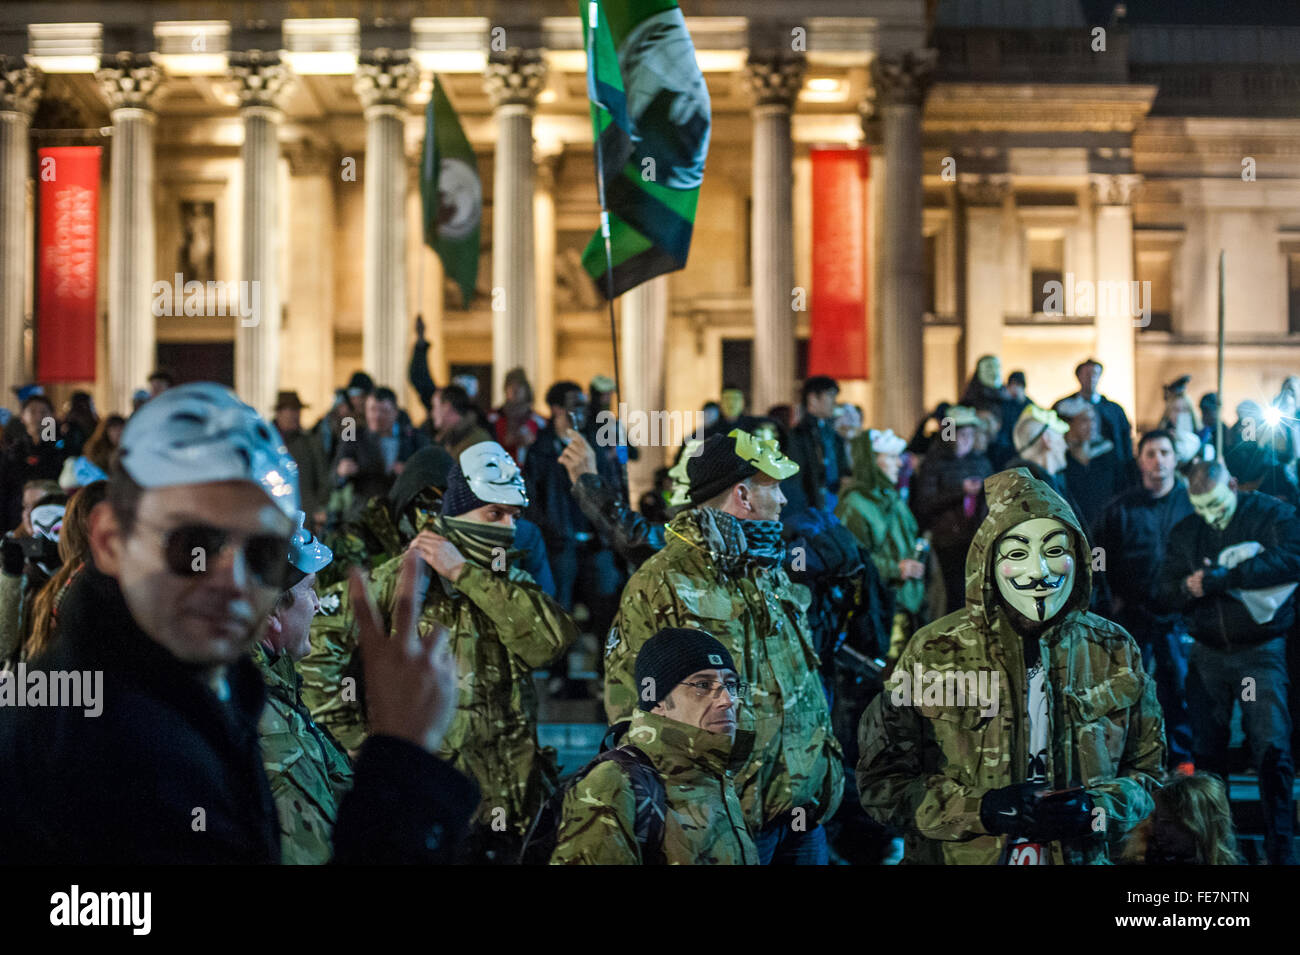 Anarchist protesters, Million Mask March, London 2014 Stock Photo